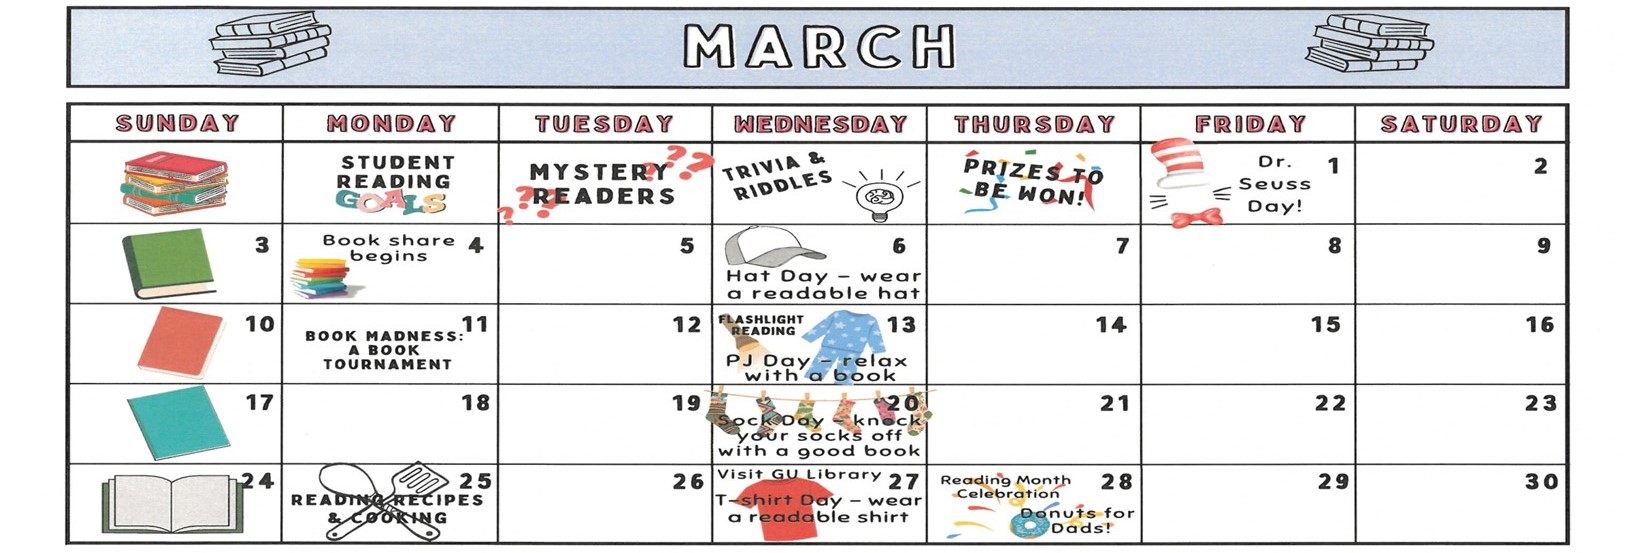 image of reading month calendar